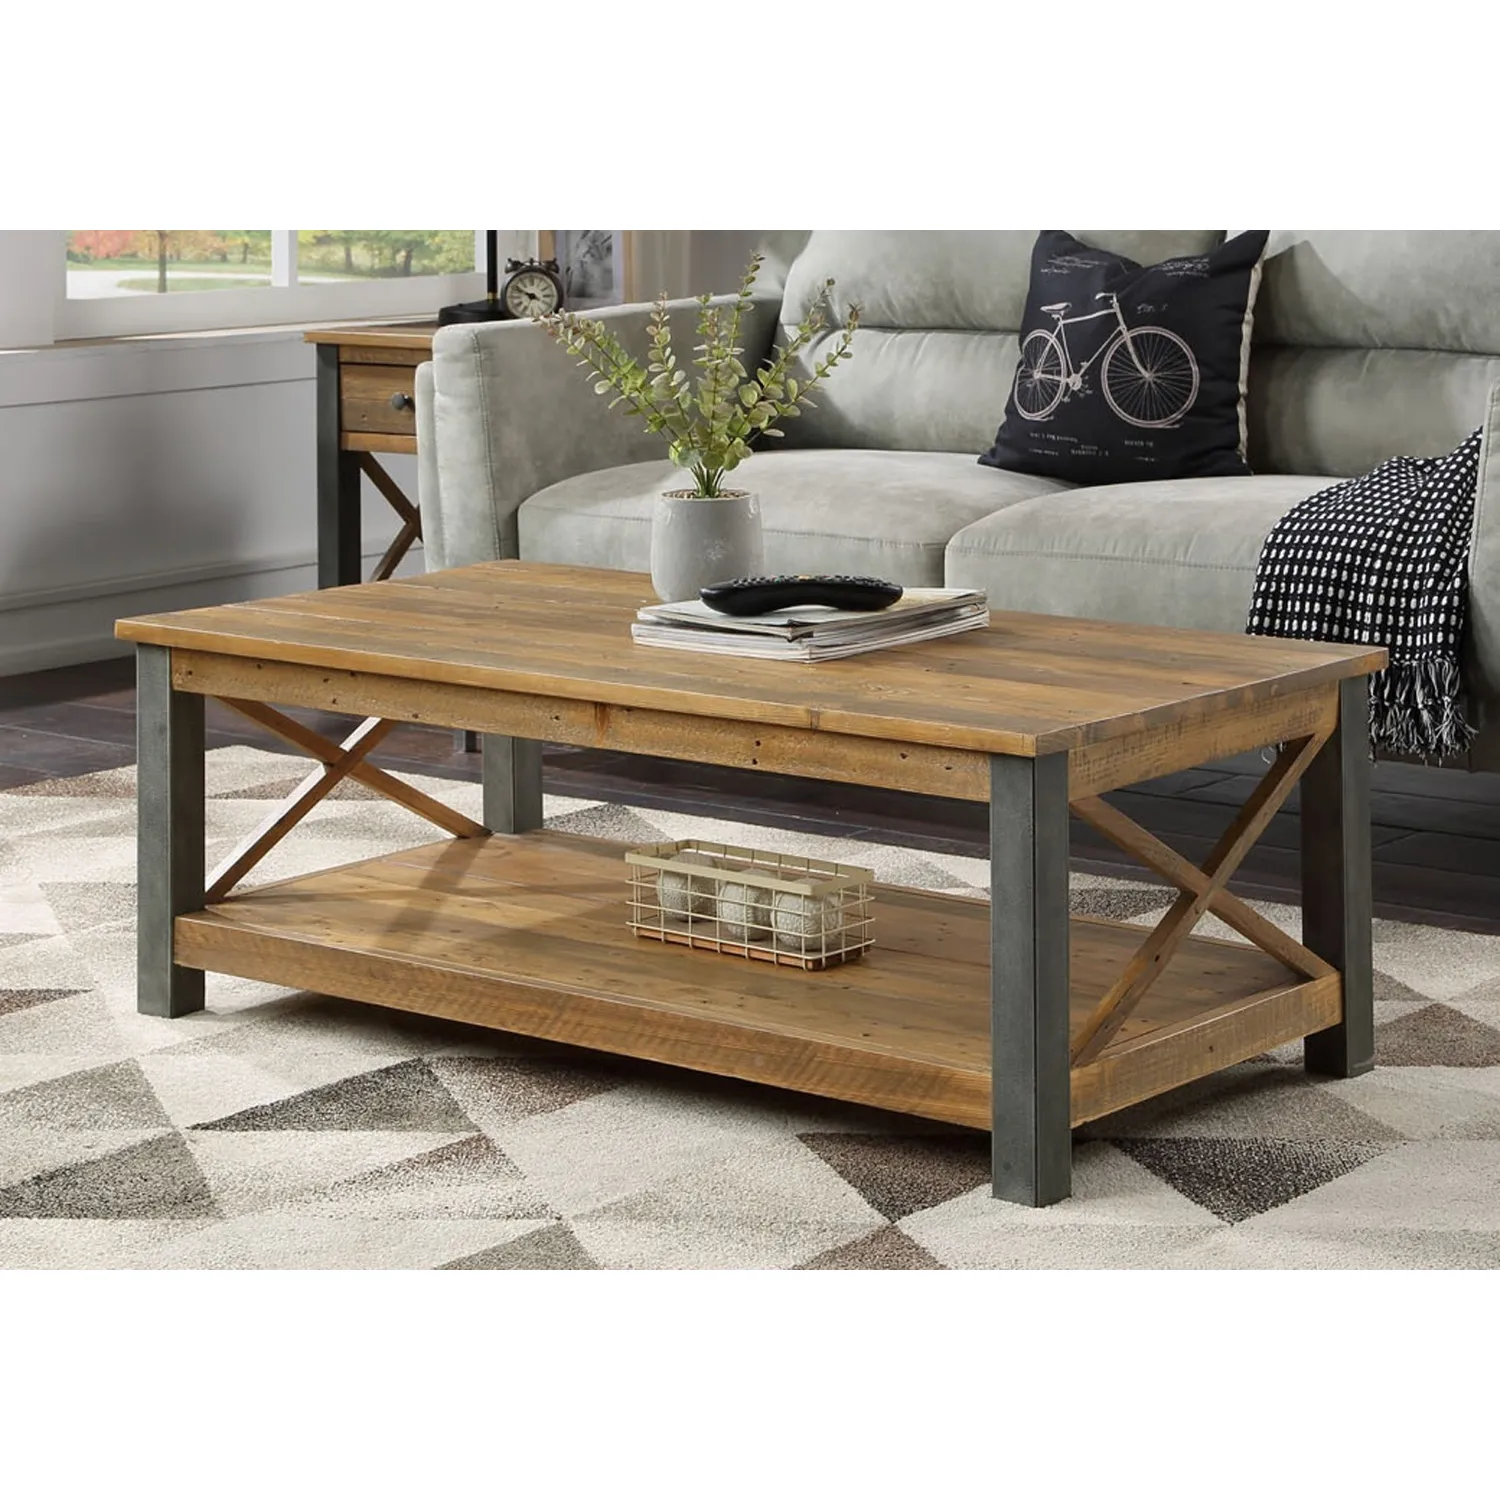 Reclaimed Wood Coffee Table with Lower Shelf